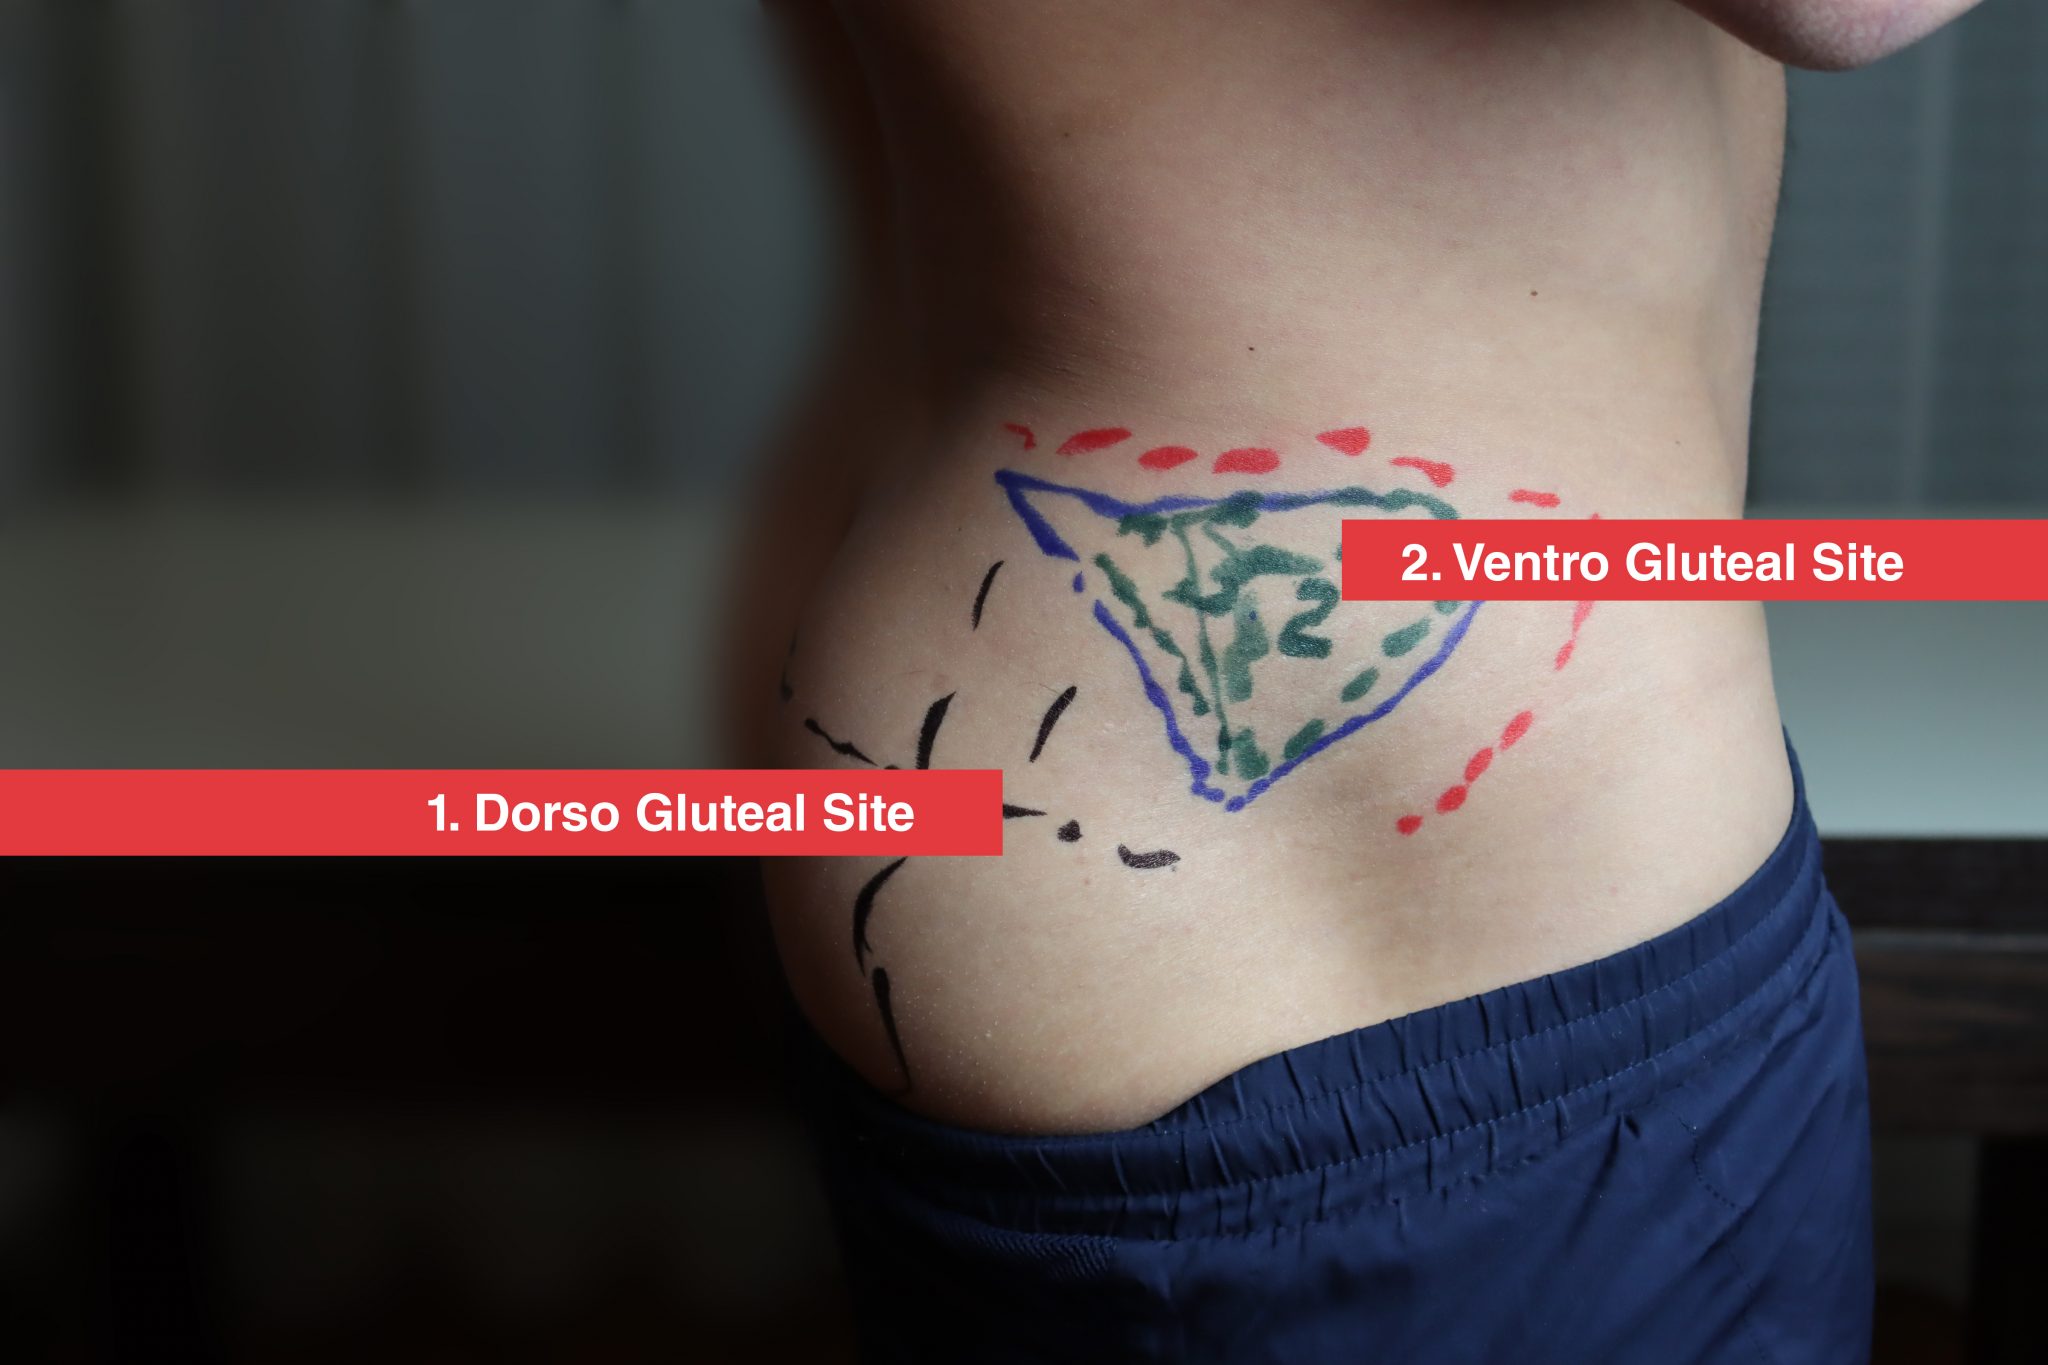 ventrogluteal injection site